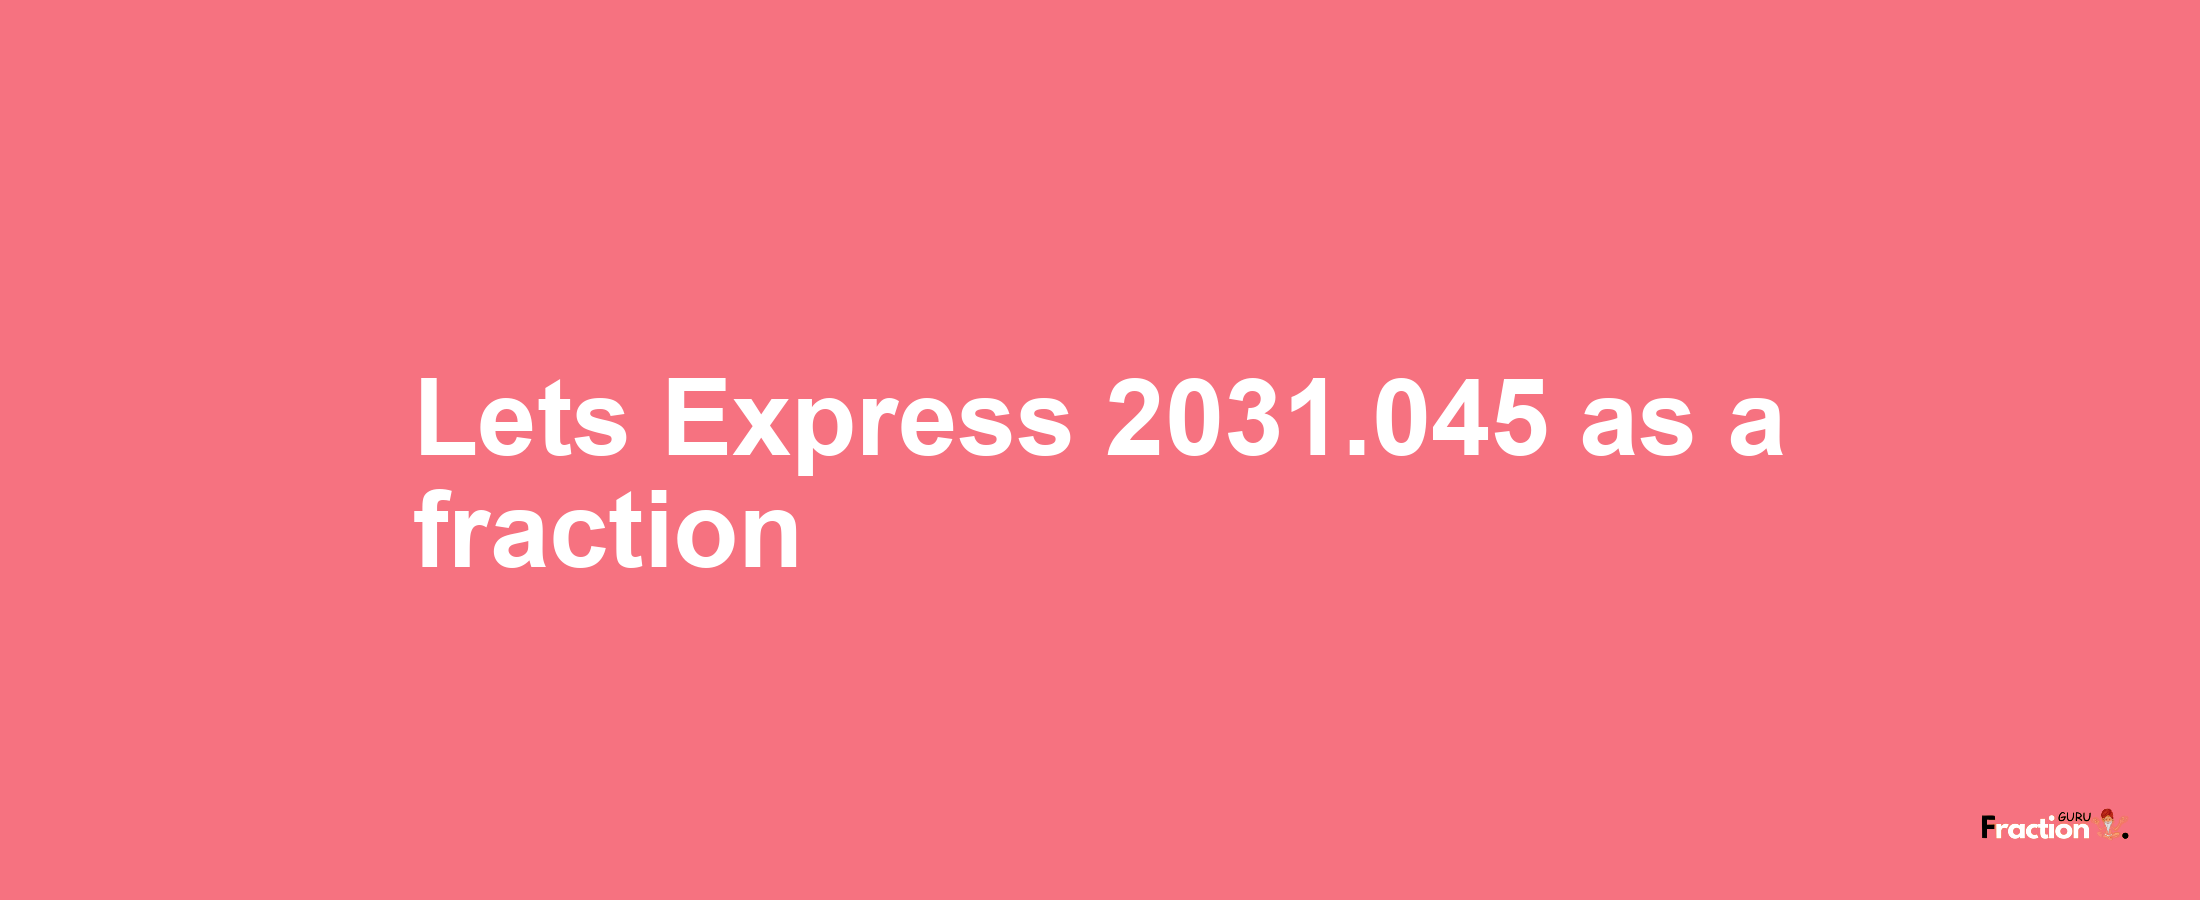 Lets Express 2031.045 as afraction